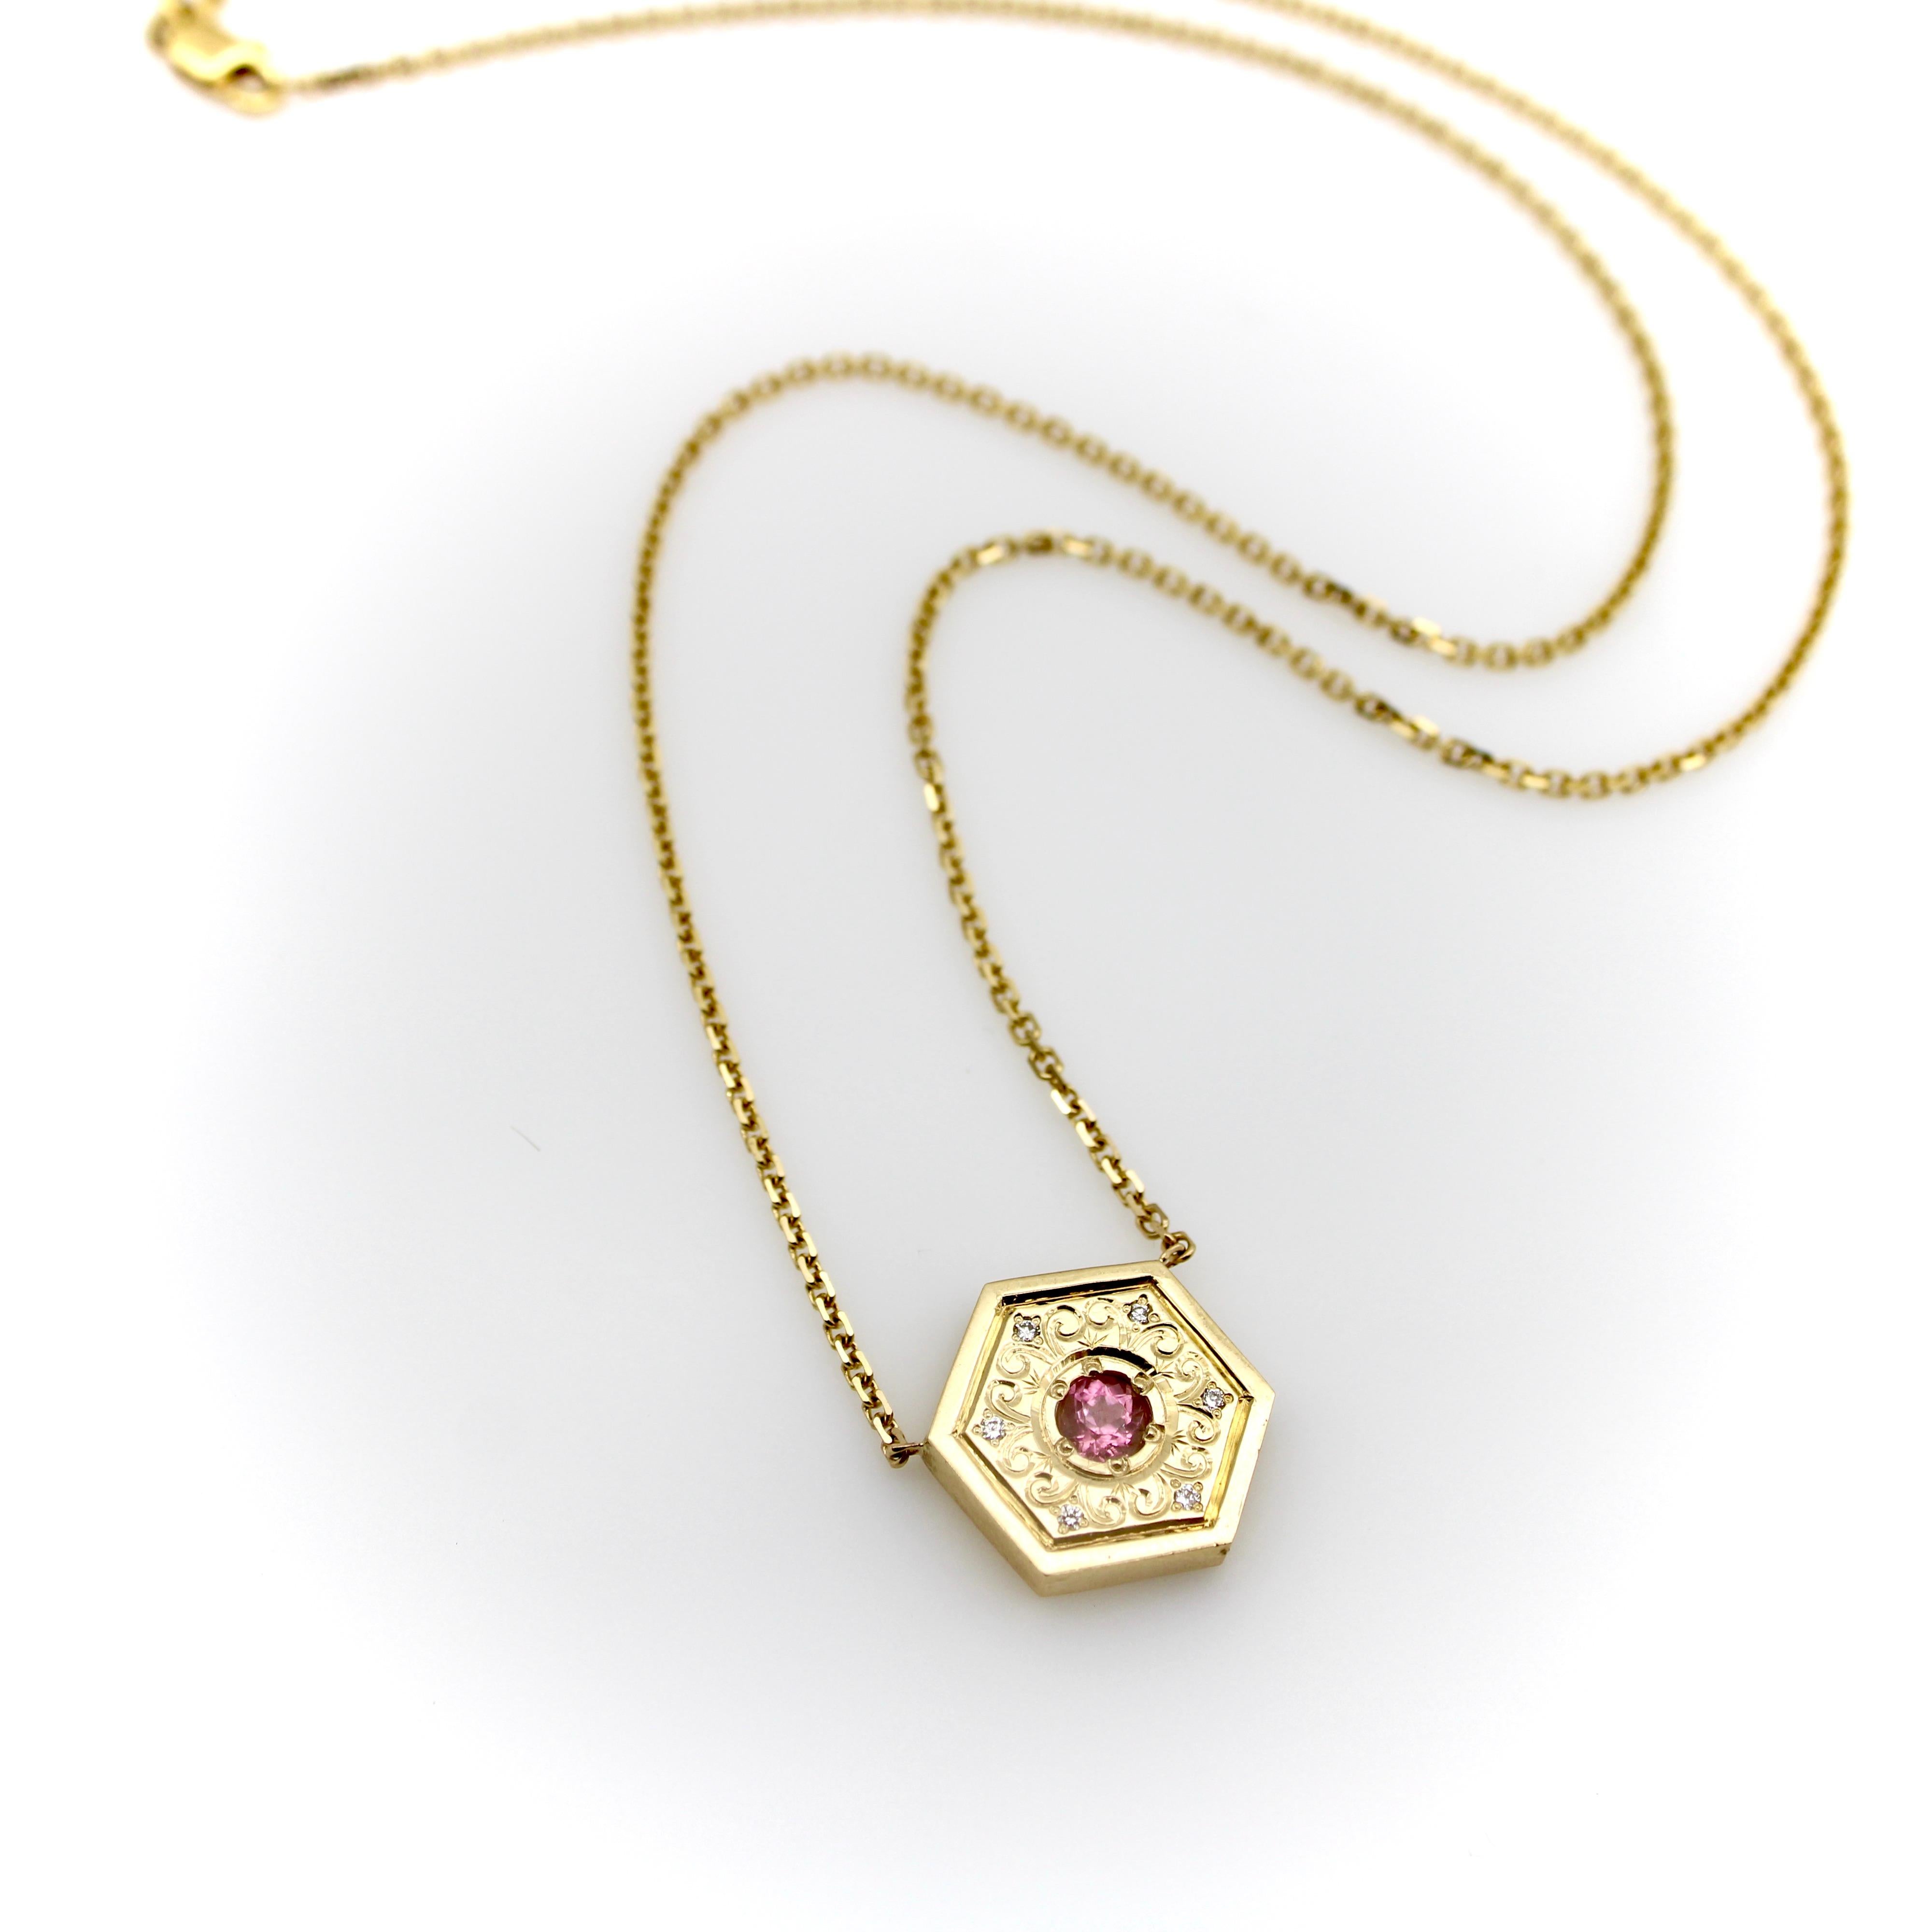 This 14k gold mandala medallion is a one-of-a-kind piece of jewelry, perfect for a yoga or meditation lover. It is hand-engraved with a rhythmic motif of scrolling foliage surrounding a sparkling pink tourmaline. Tiny single cut diamonds are